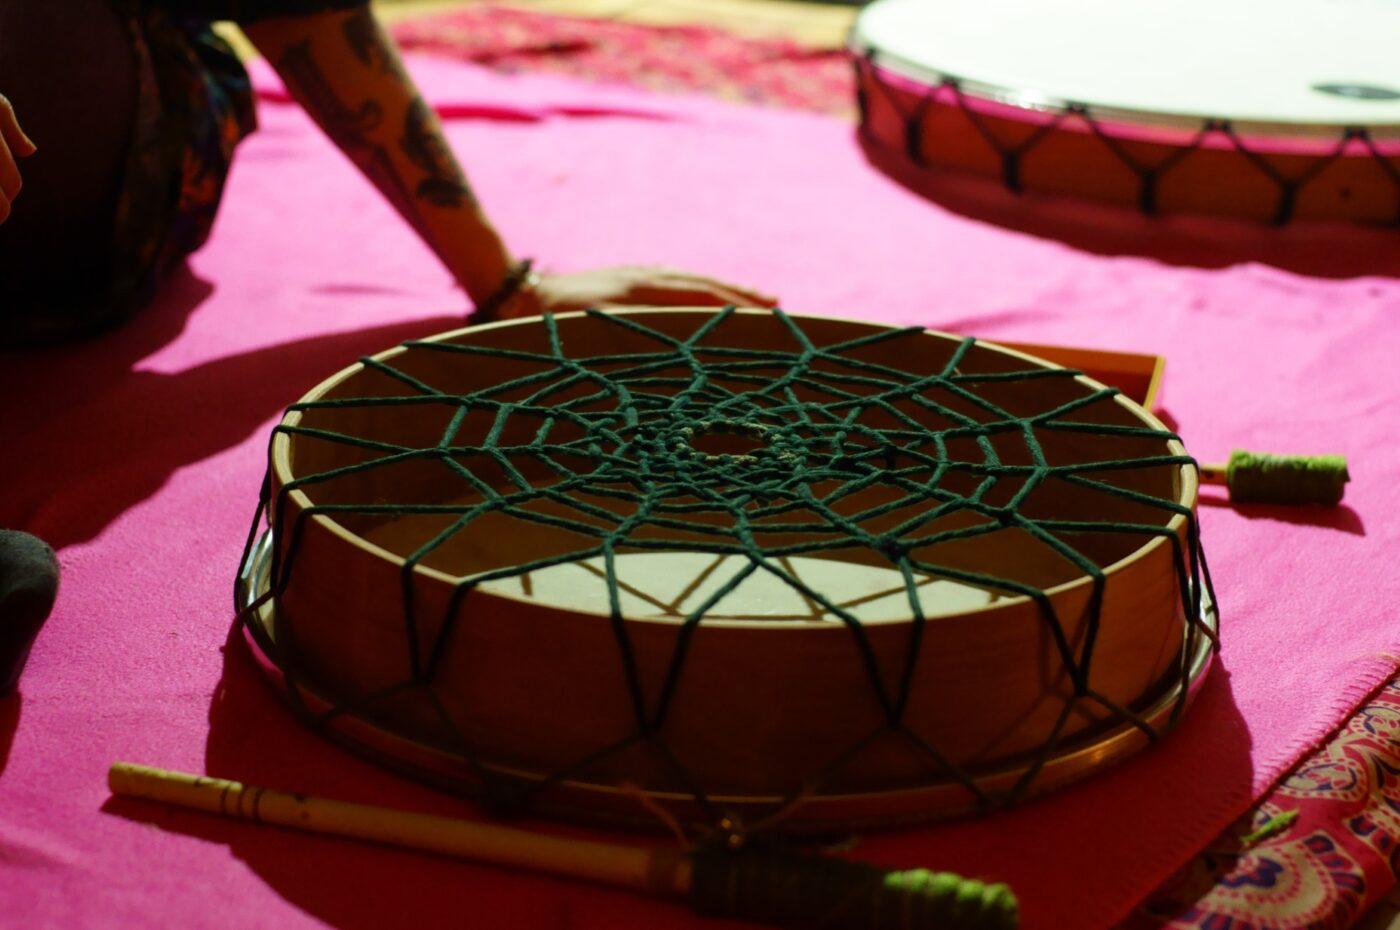 ceremony of the birth of a vegan shamatian drum